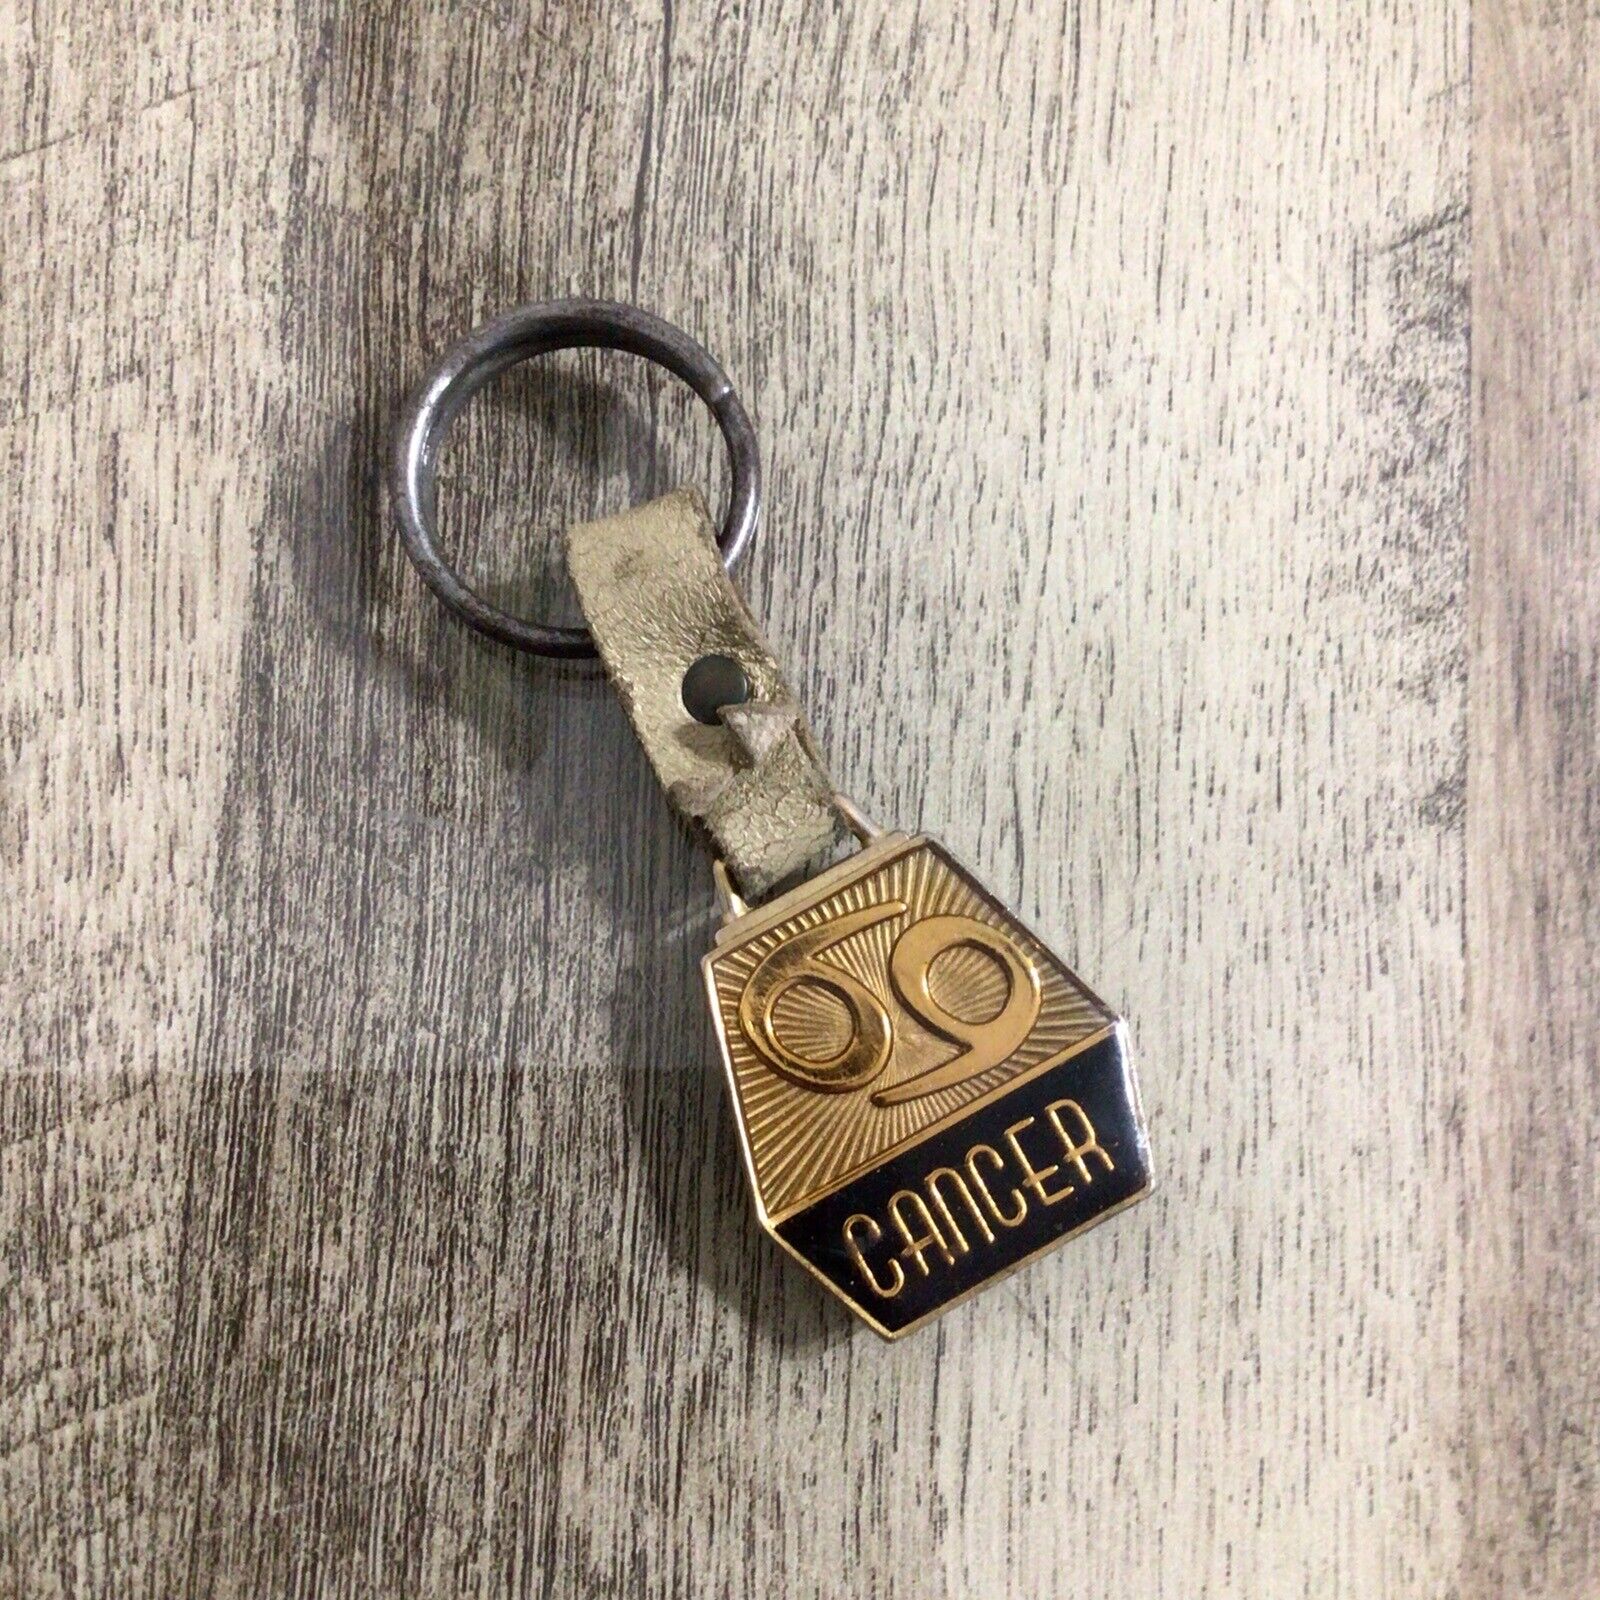 Vintage 69 Cancer Zodiac Astrological Sign Metal Key Chain Ring